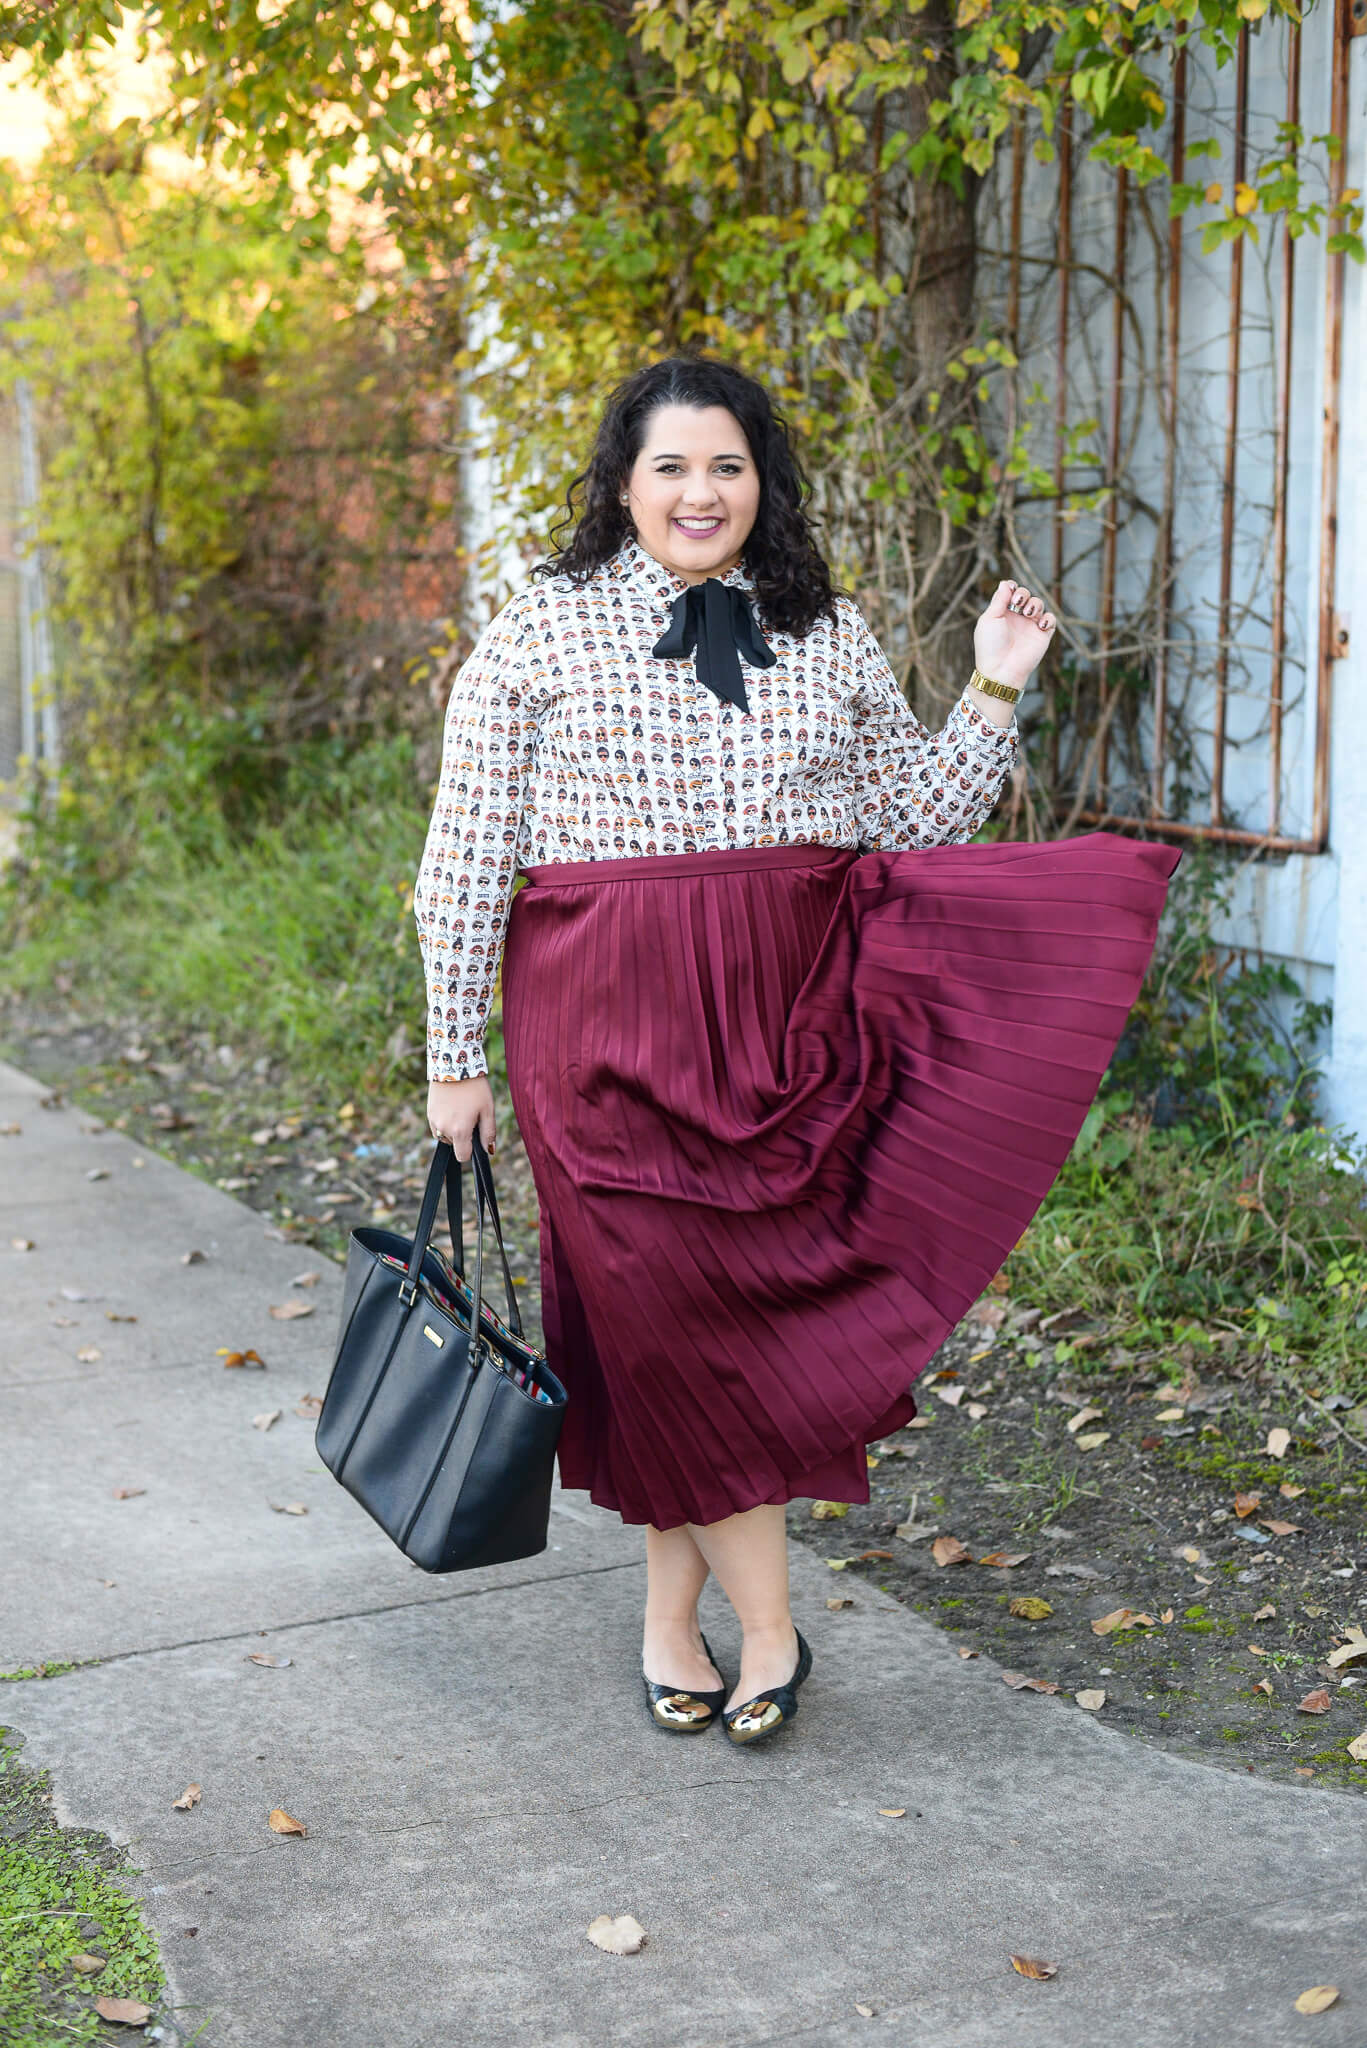 How to wear a statement piece to work as a plus size babe